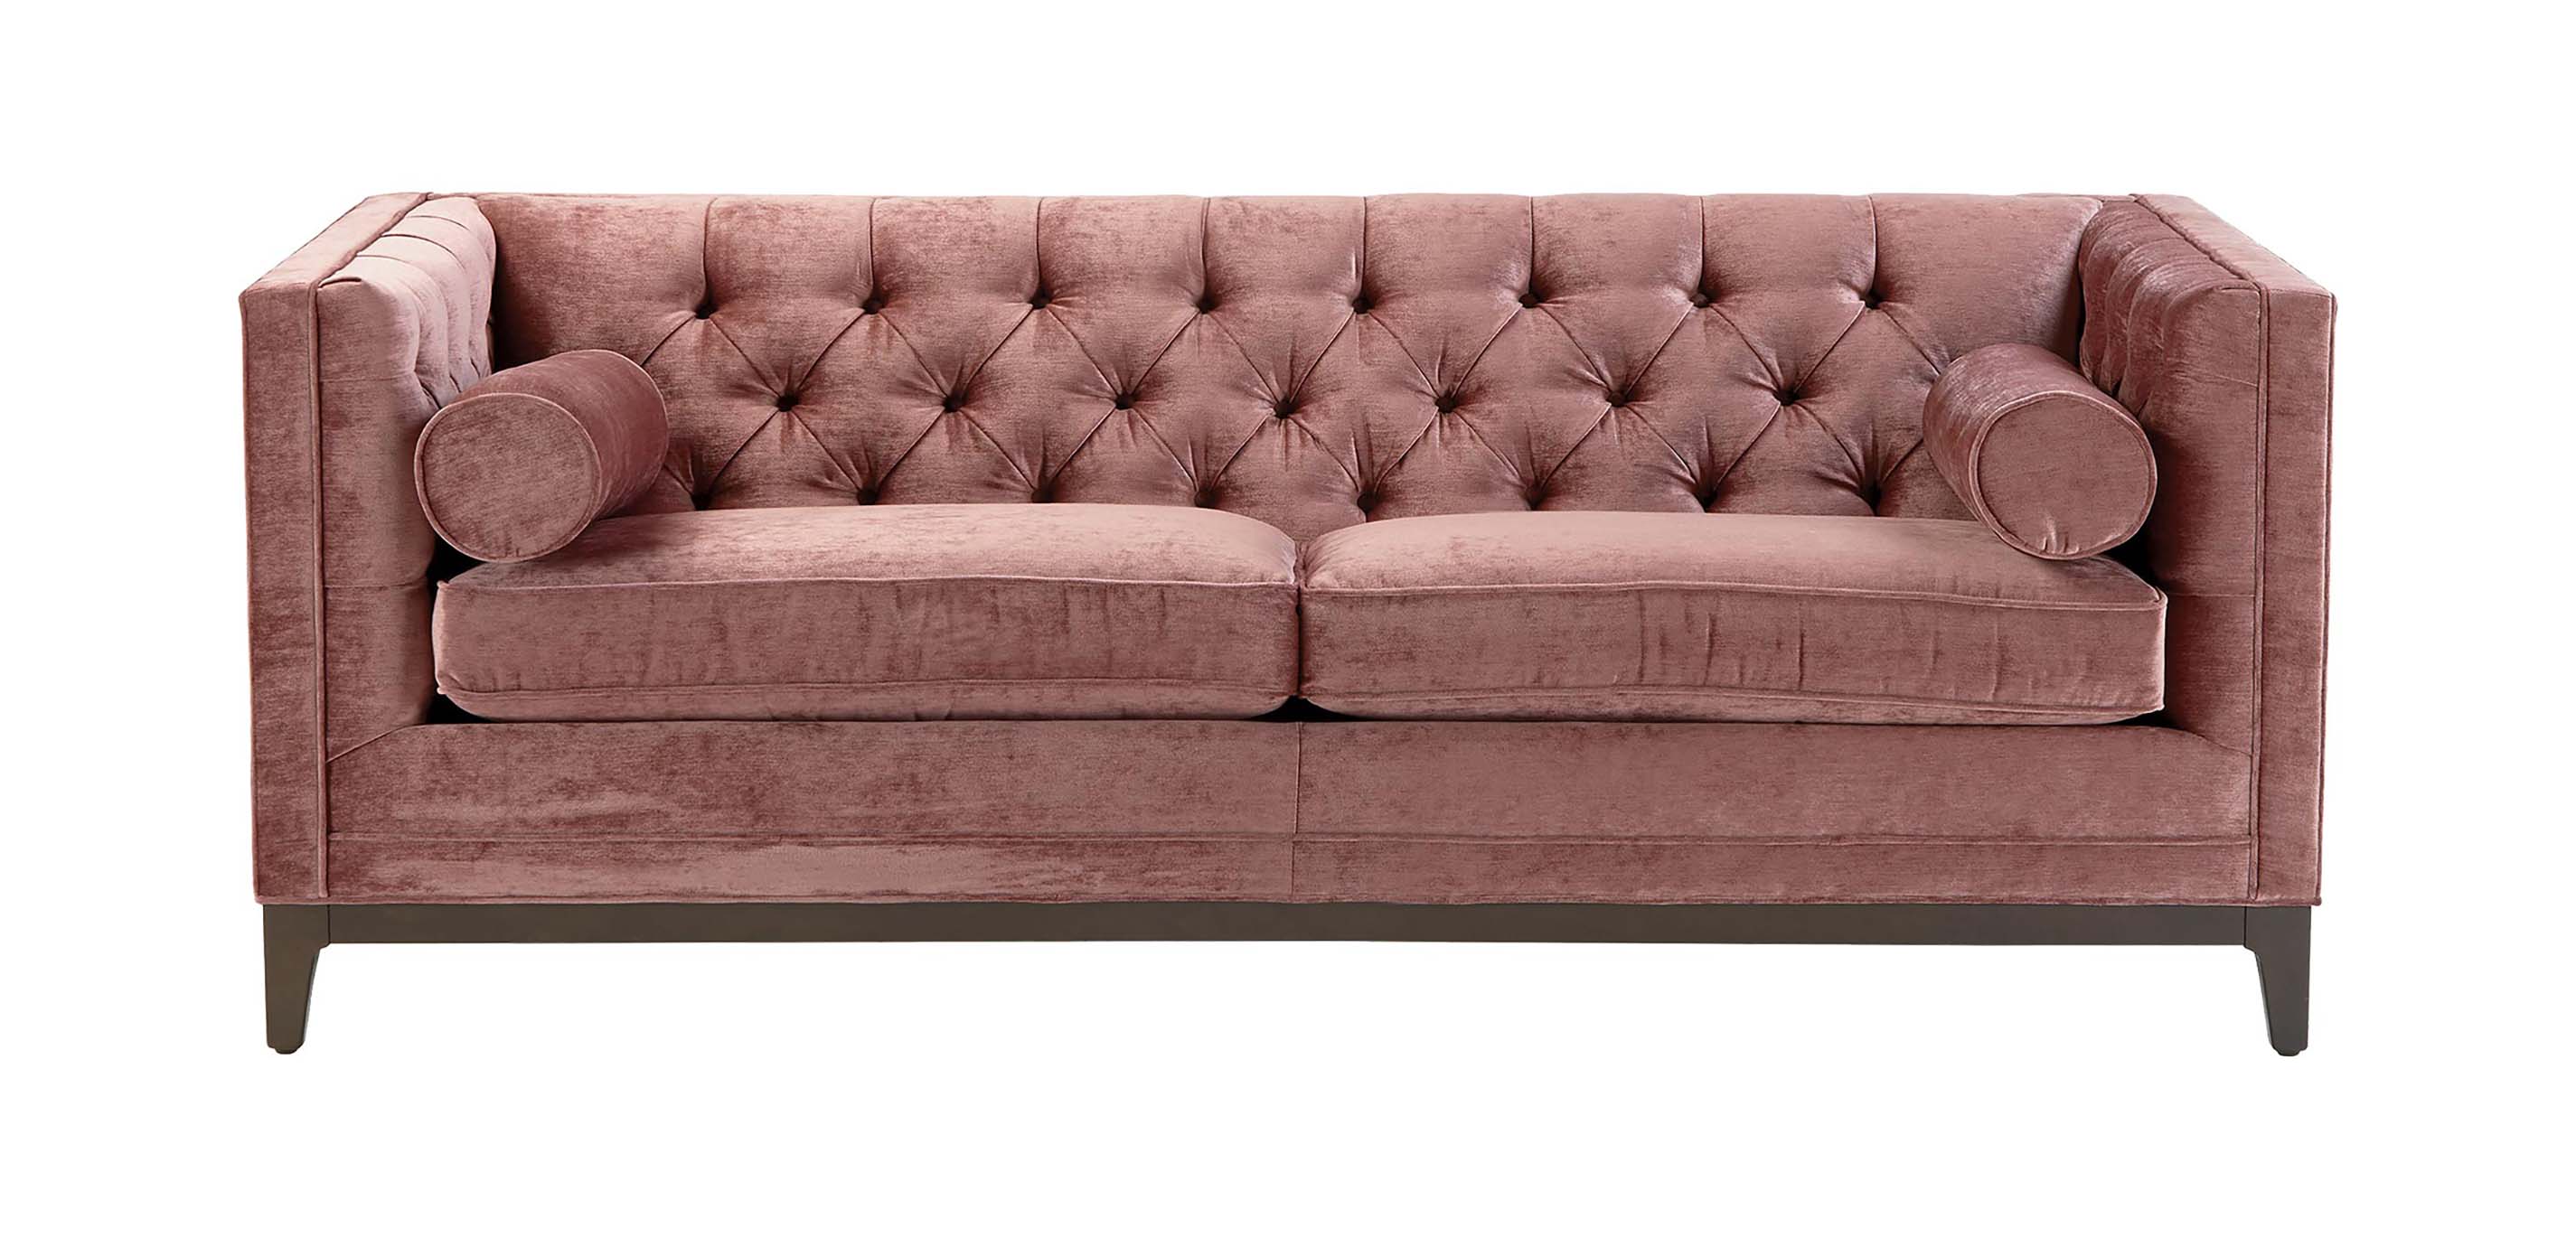 ethan allen leather sofa scratches